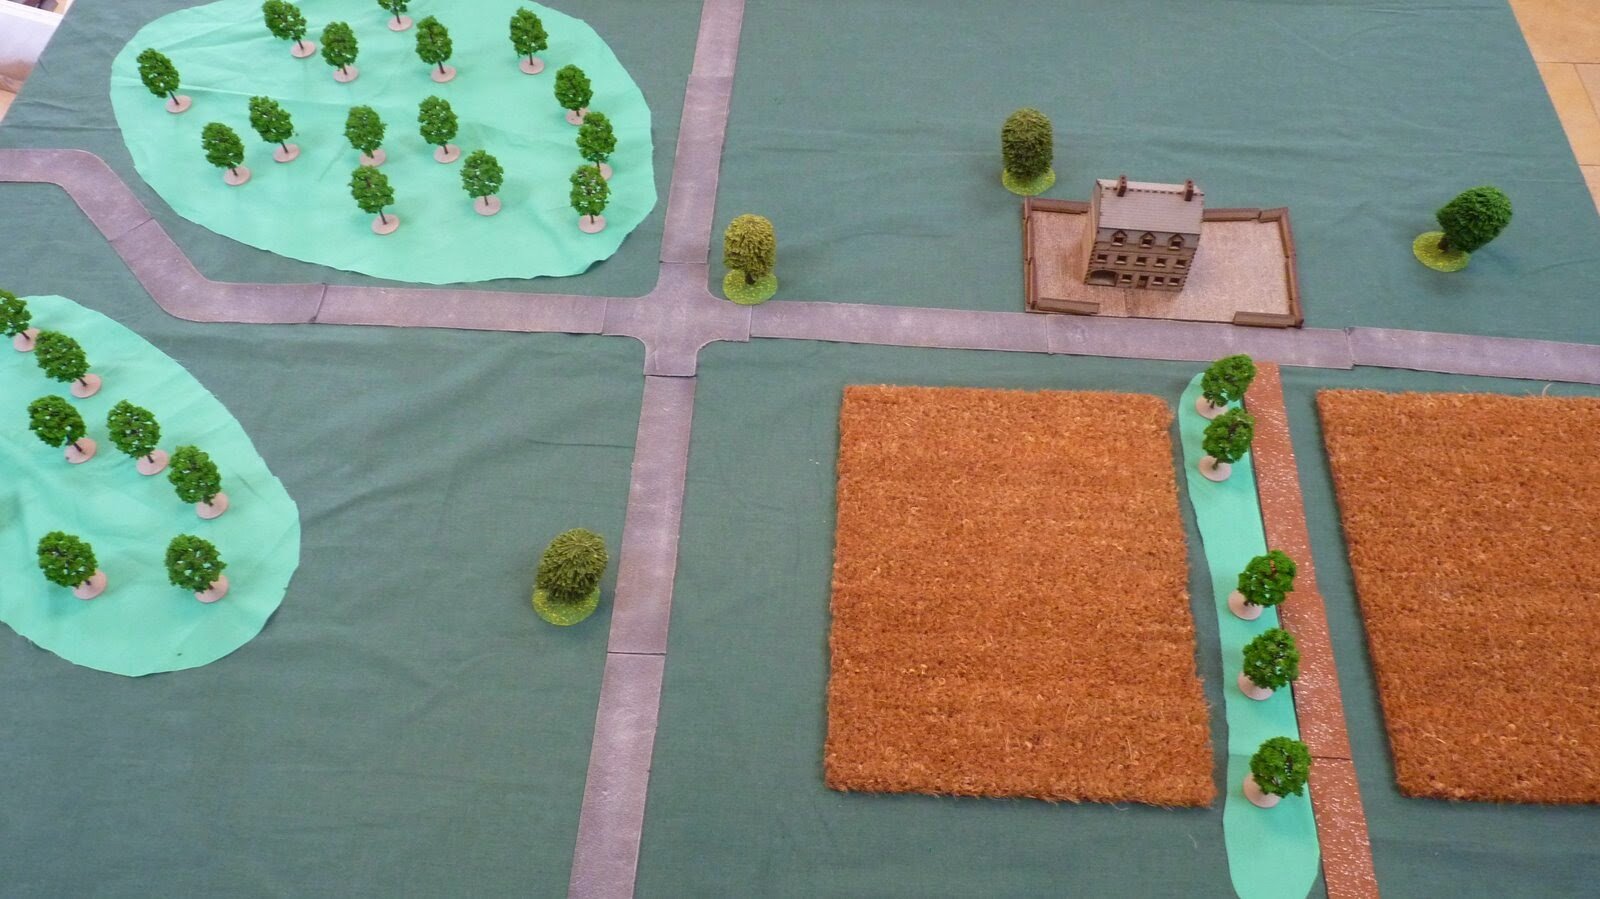 The table is shown below from the west. The Bundeswehr had the mission of seizing the crossroads. There were 2 woods, a country hotel and a pair of cornfields with the crops high and ready to harvest.